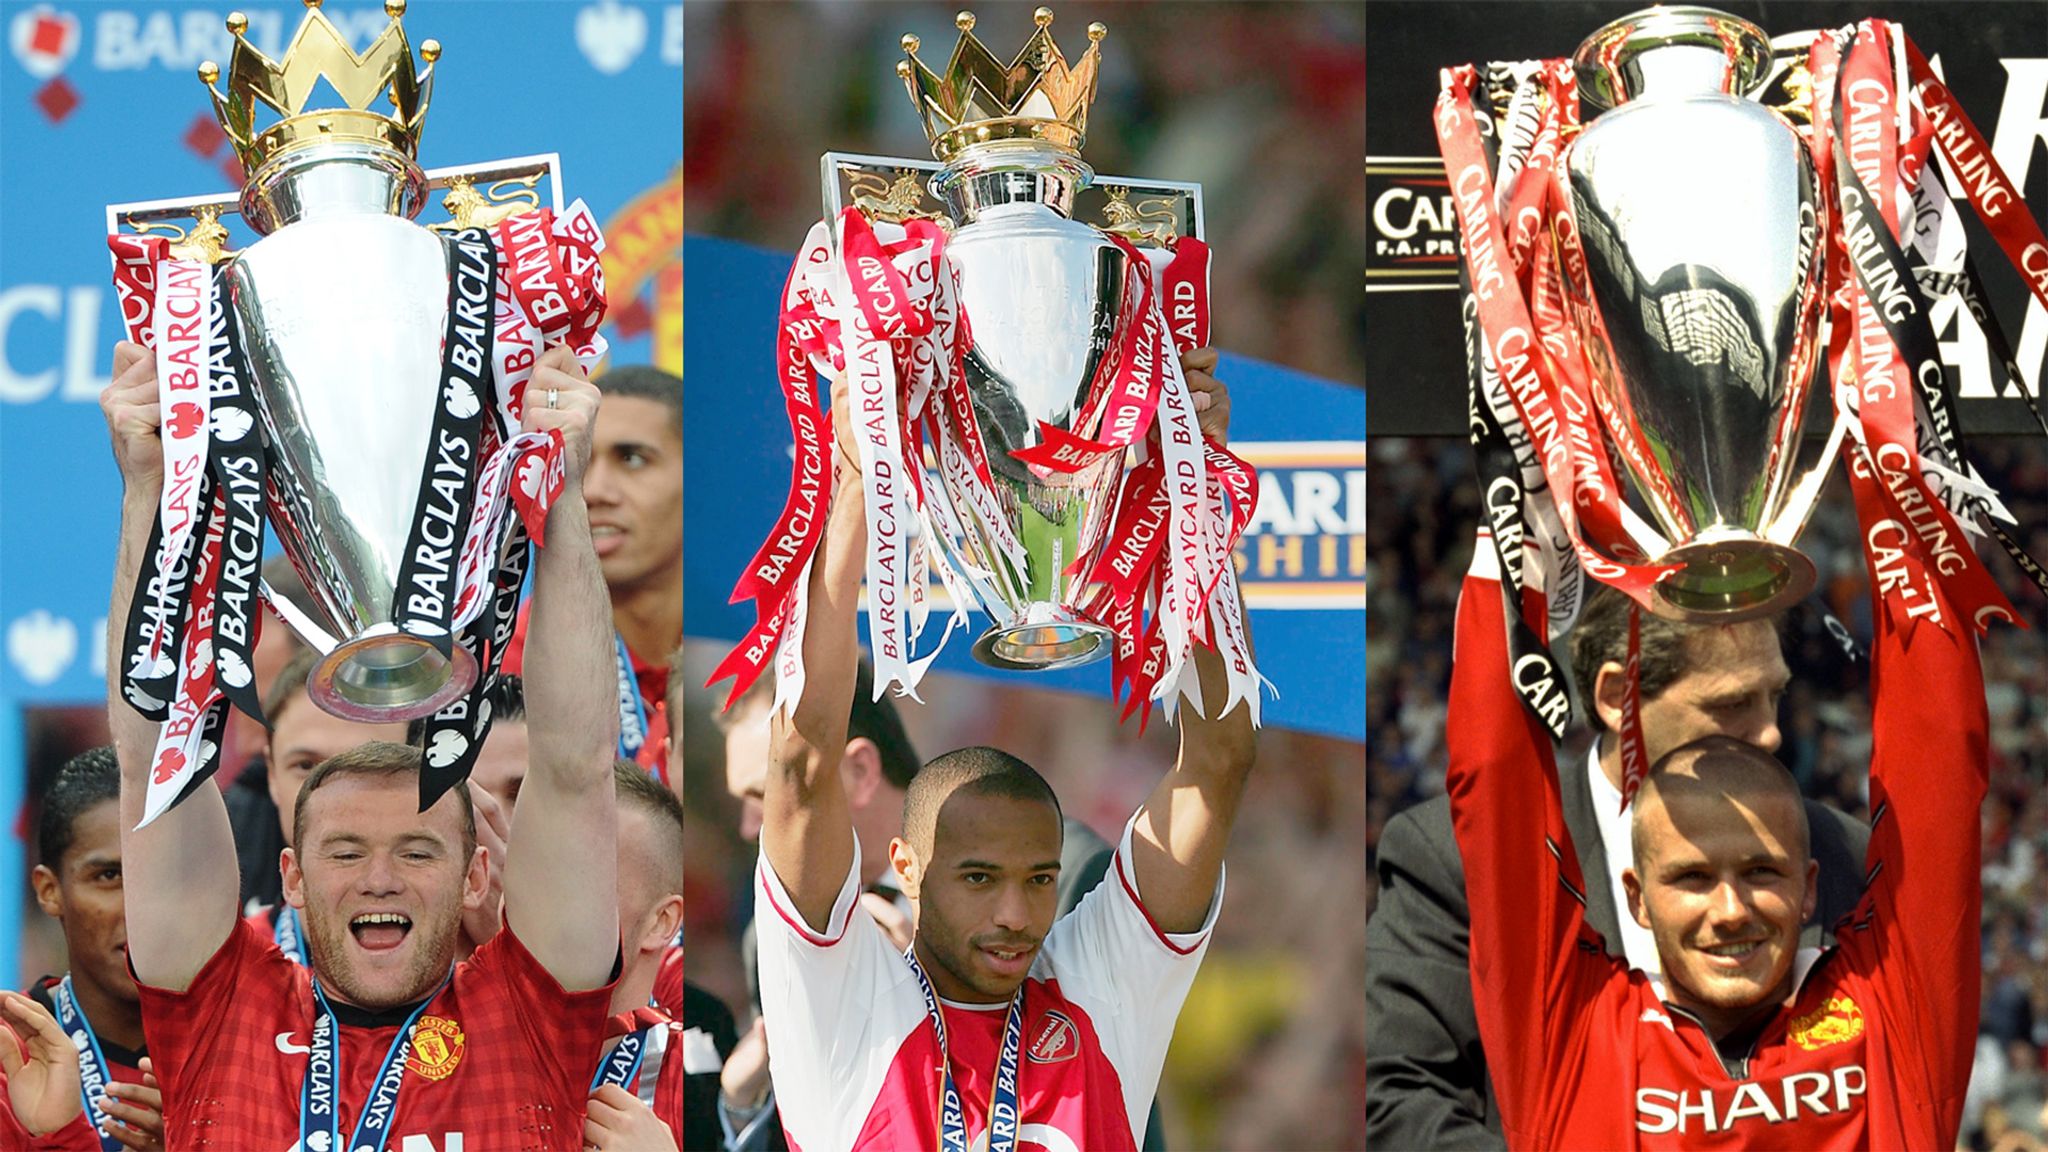 The story of the 2012-13 Premier League title